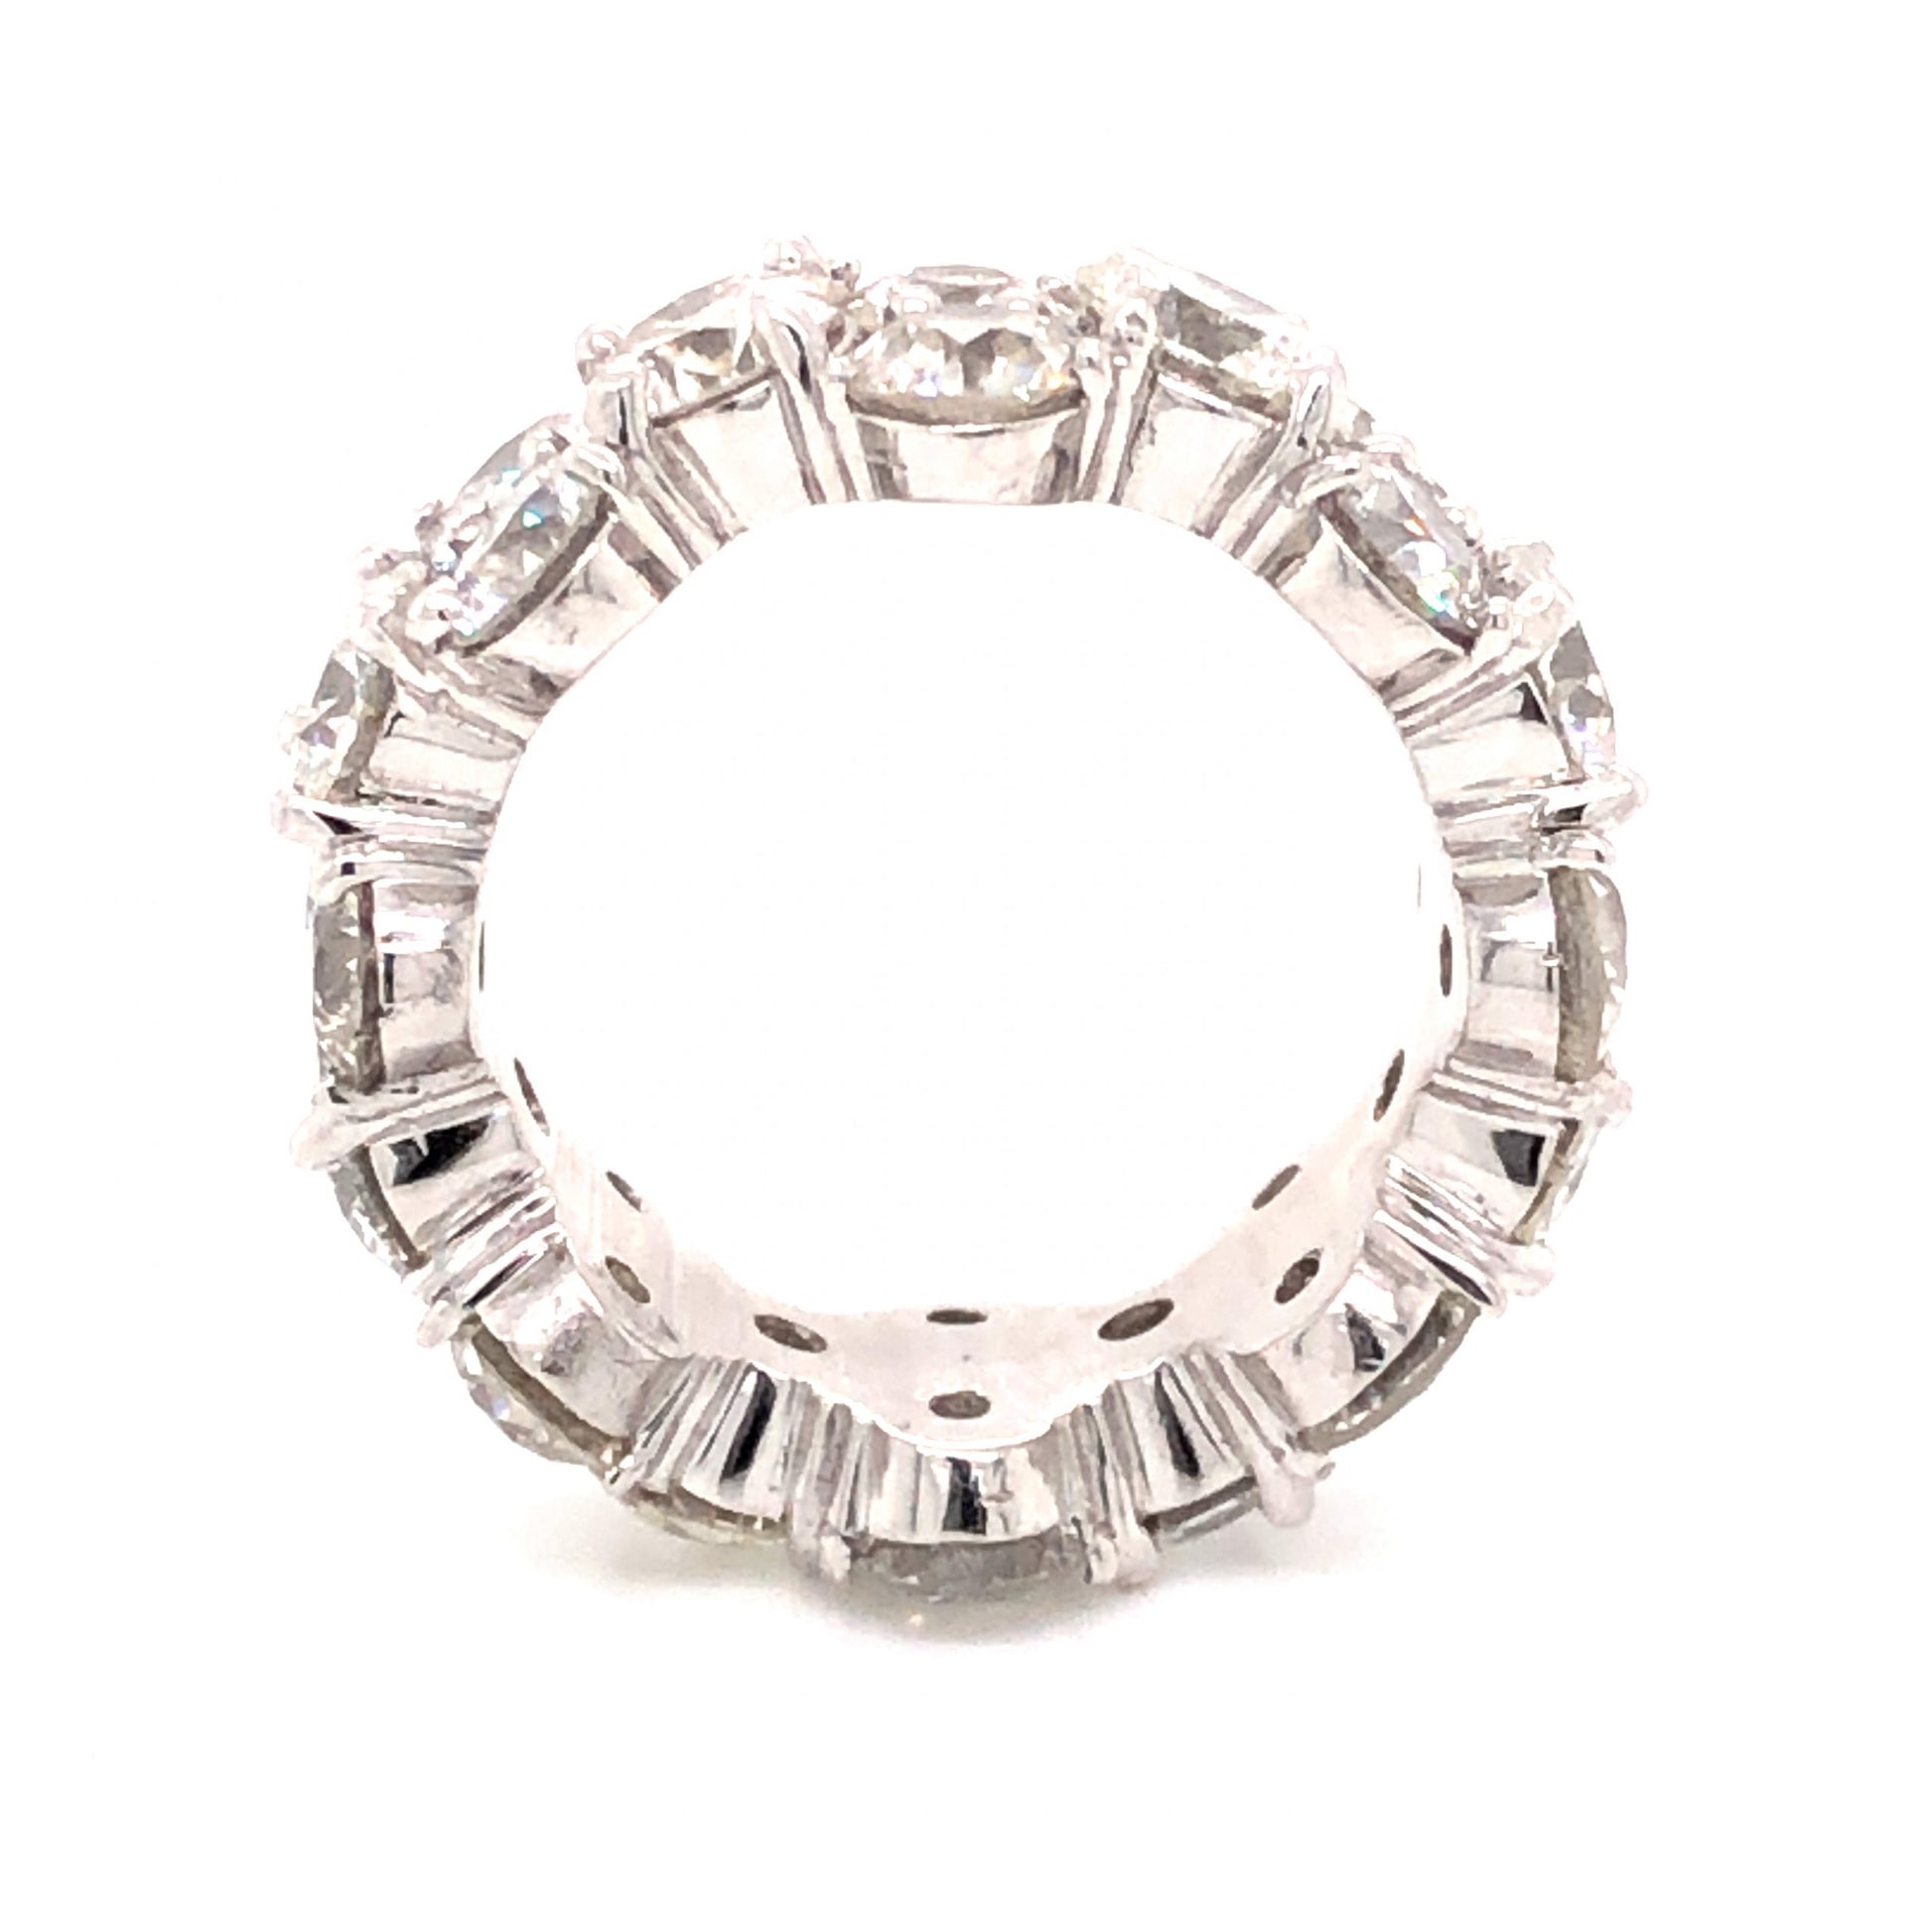 9.92 Round Brilliant Cut Diamond Eternity Ring in PlatinumComposition: PlatinumRing Size: 6Total Diamond Weight: 9.92 ctTotal Gram Weight: 14.3 g